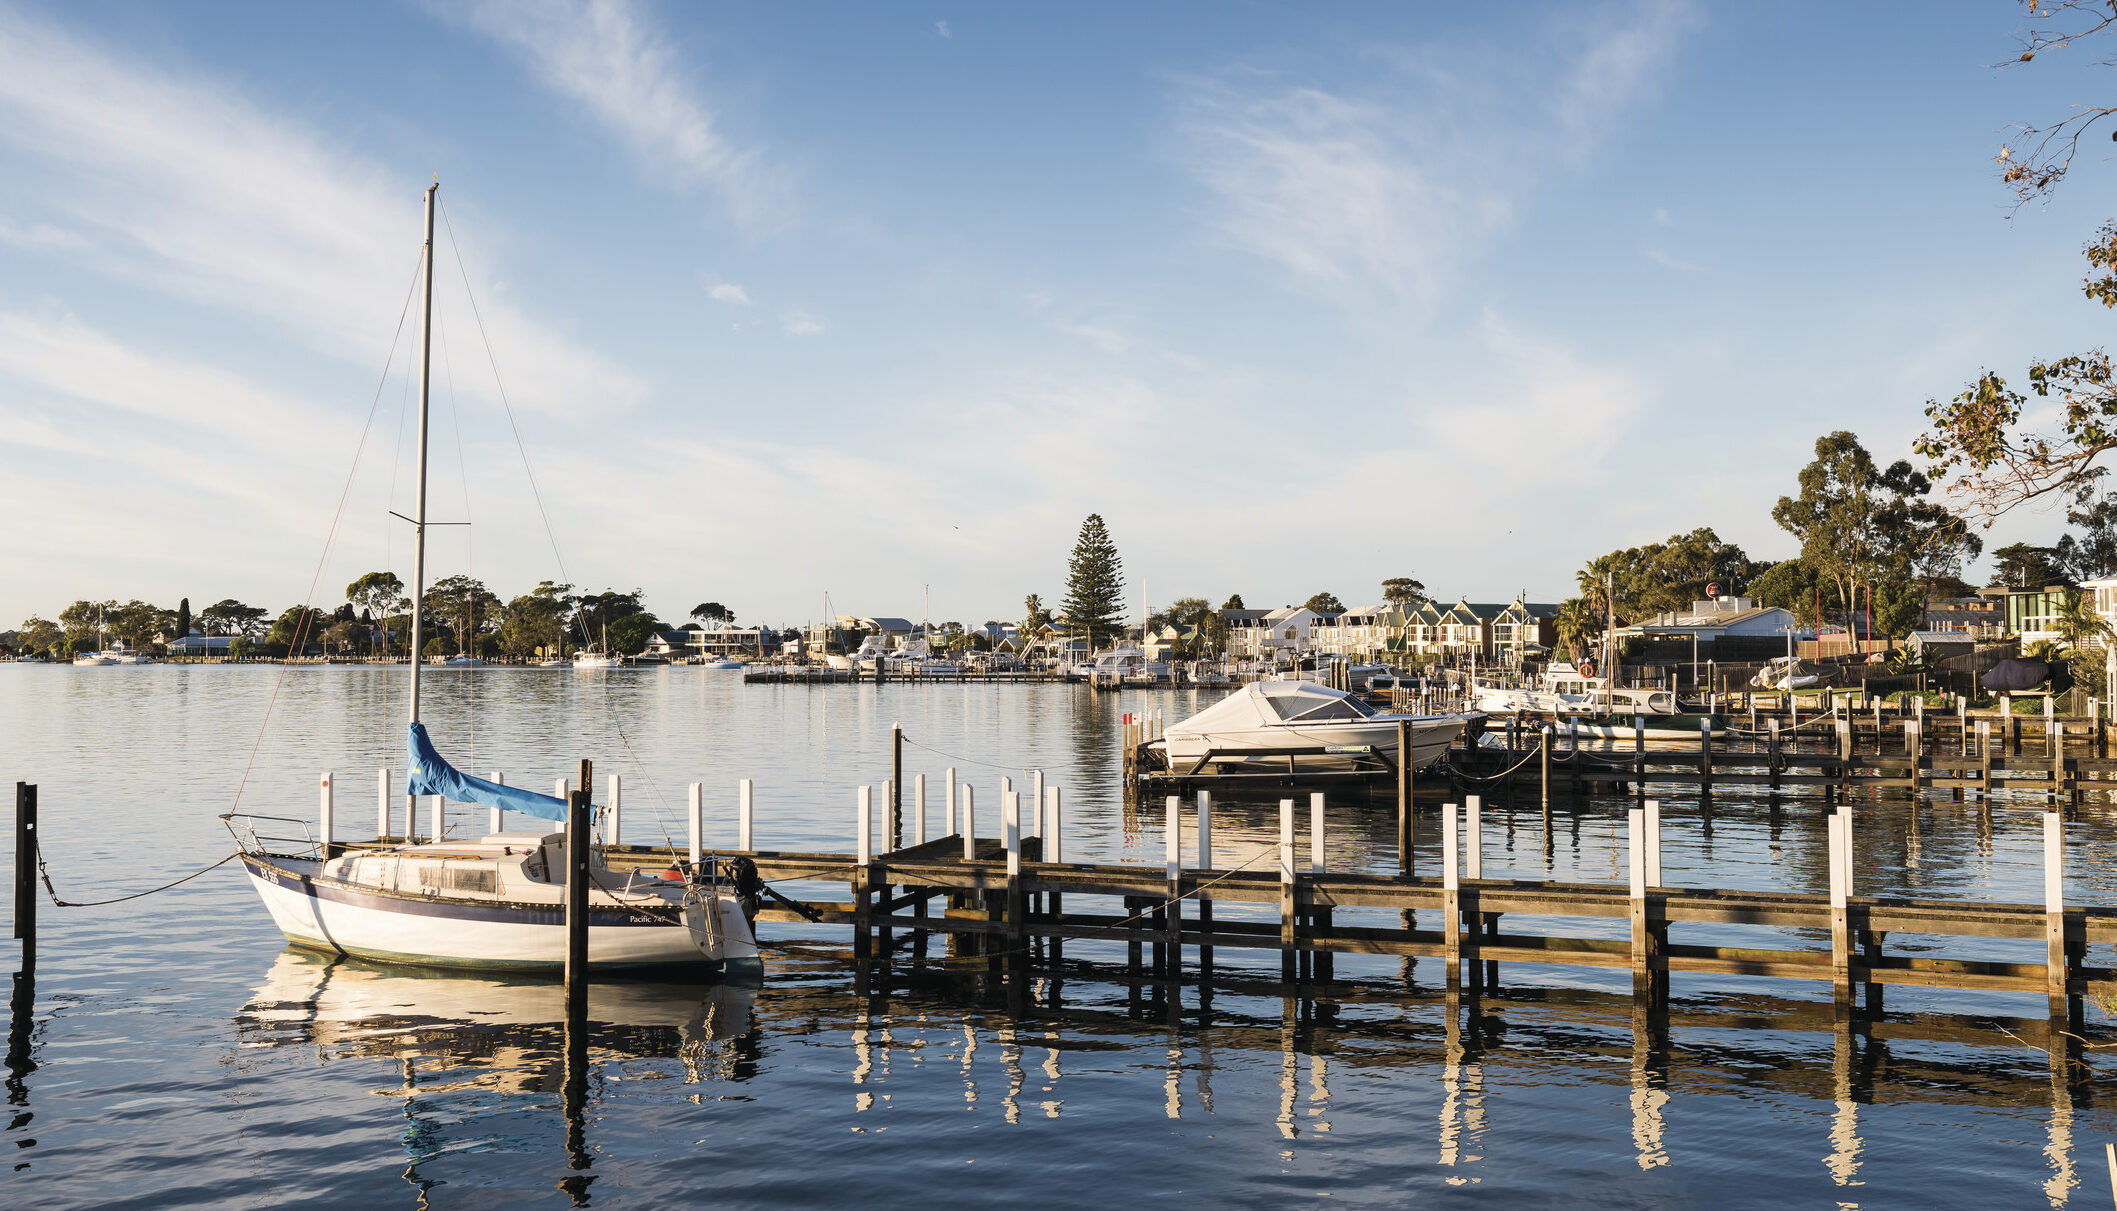 Boats at the dock in Metung, Gippsland